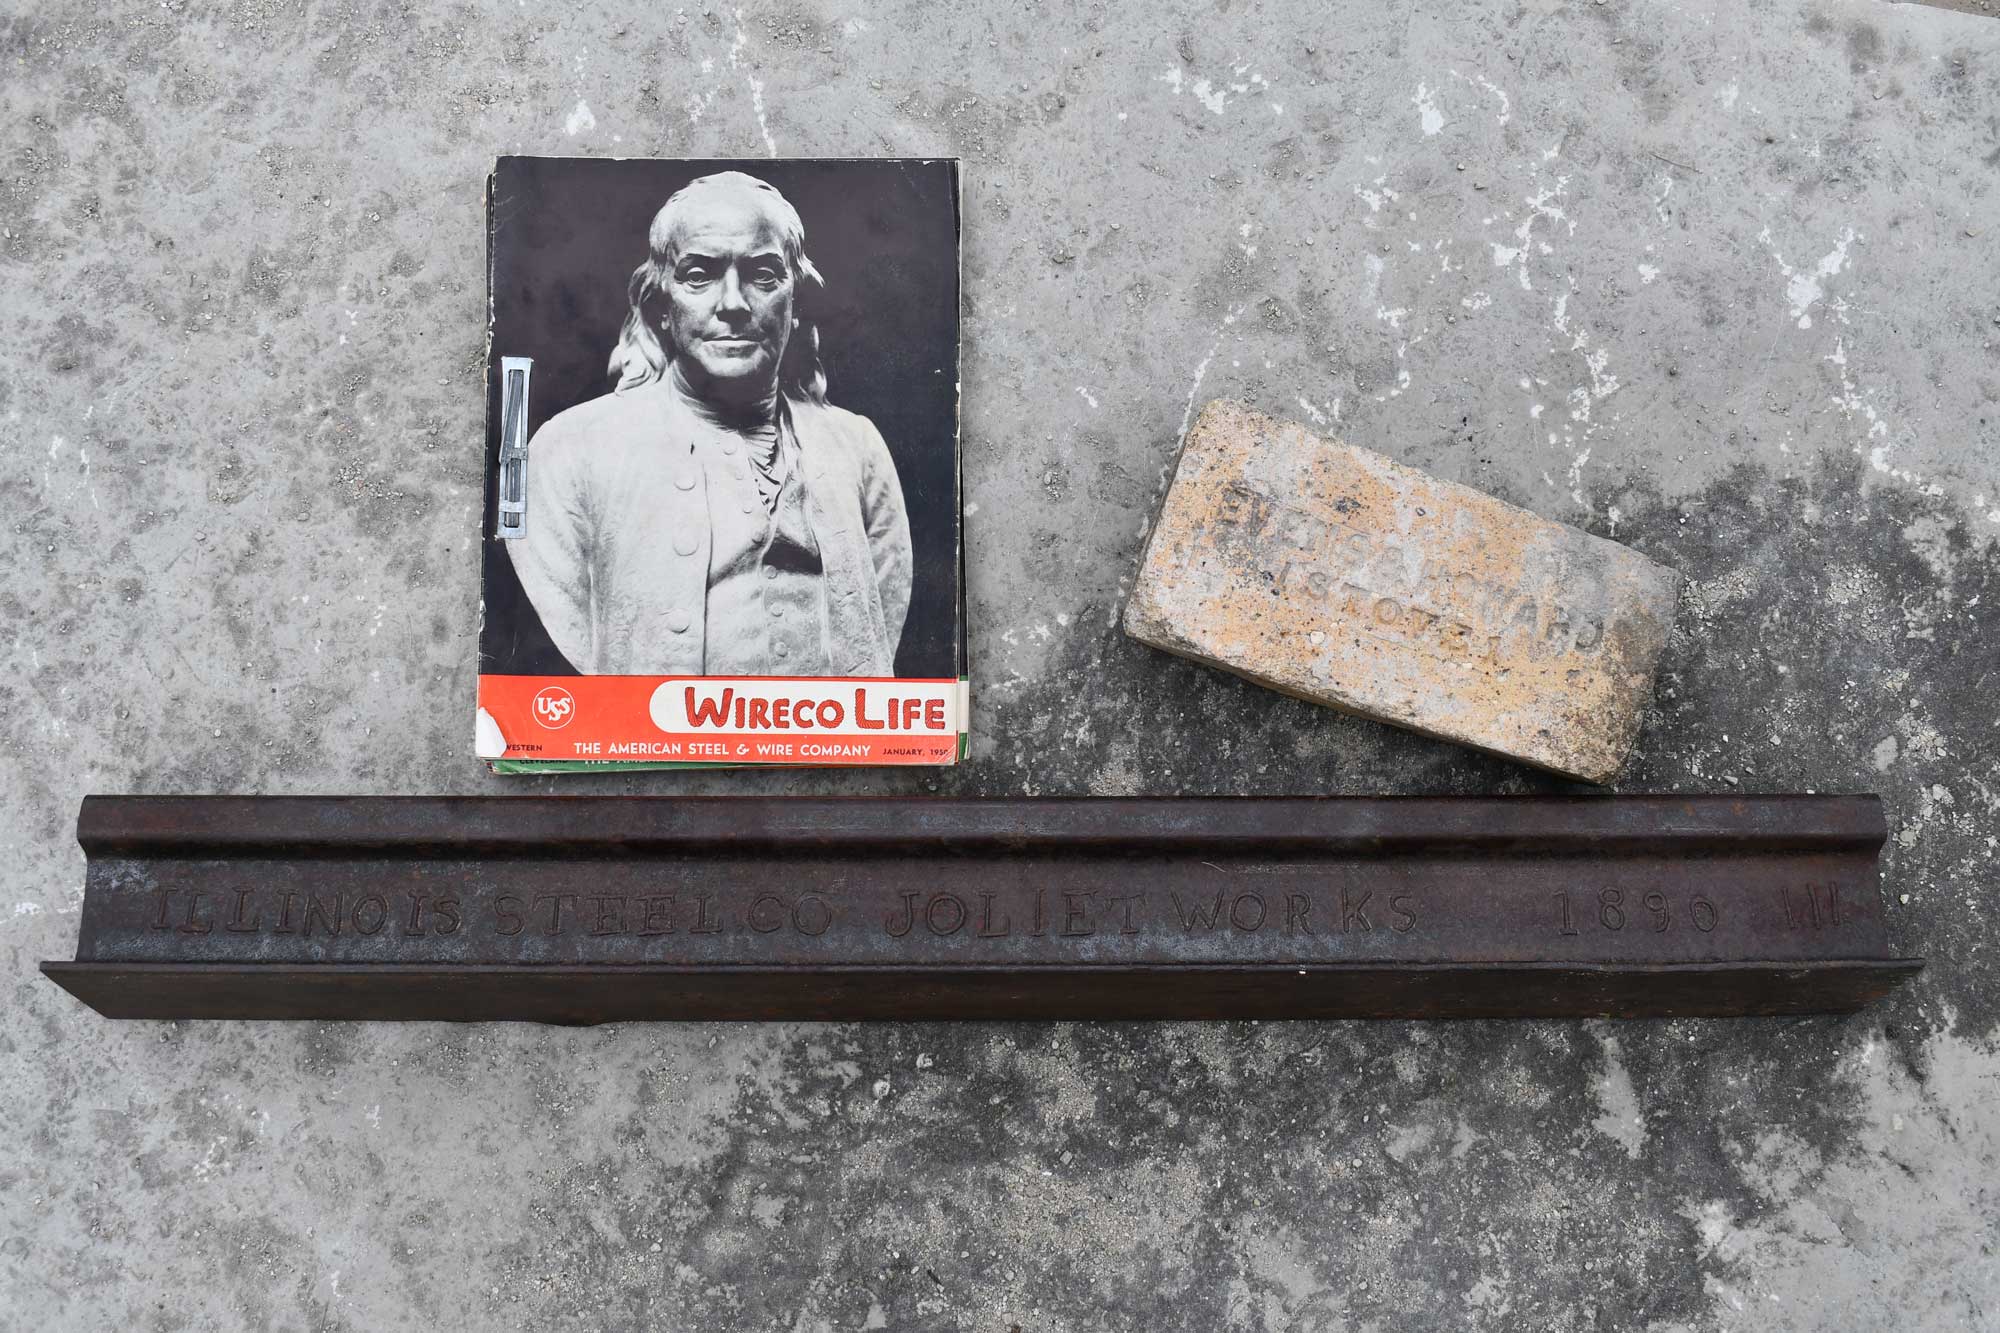 A display of artifacts from Joliet Iron Works, including a photo and a brick.